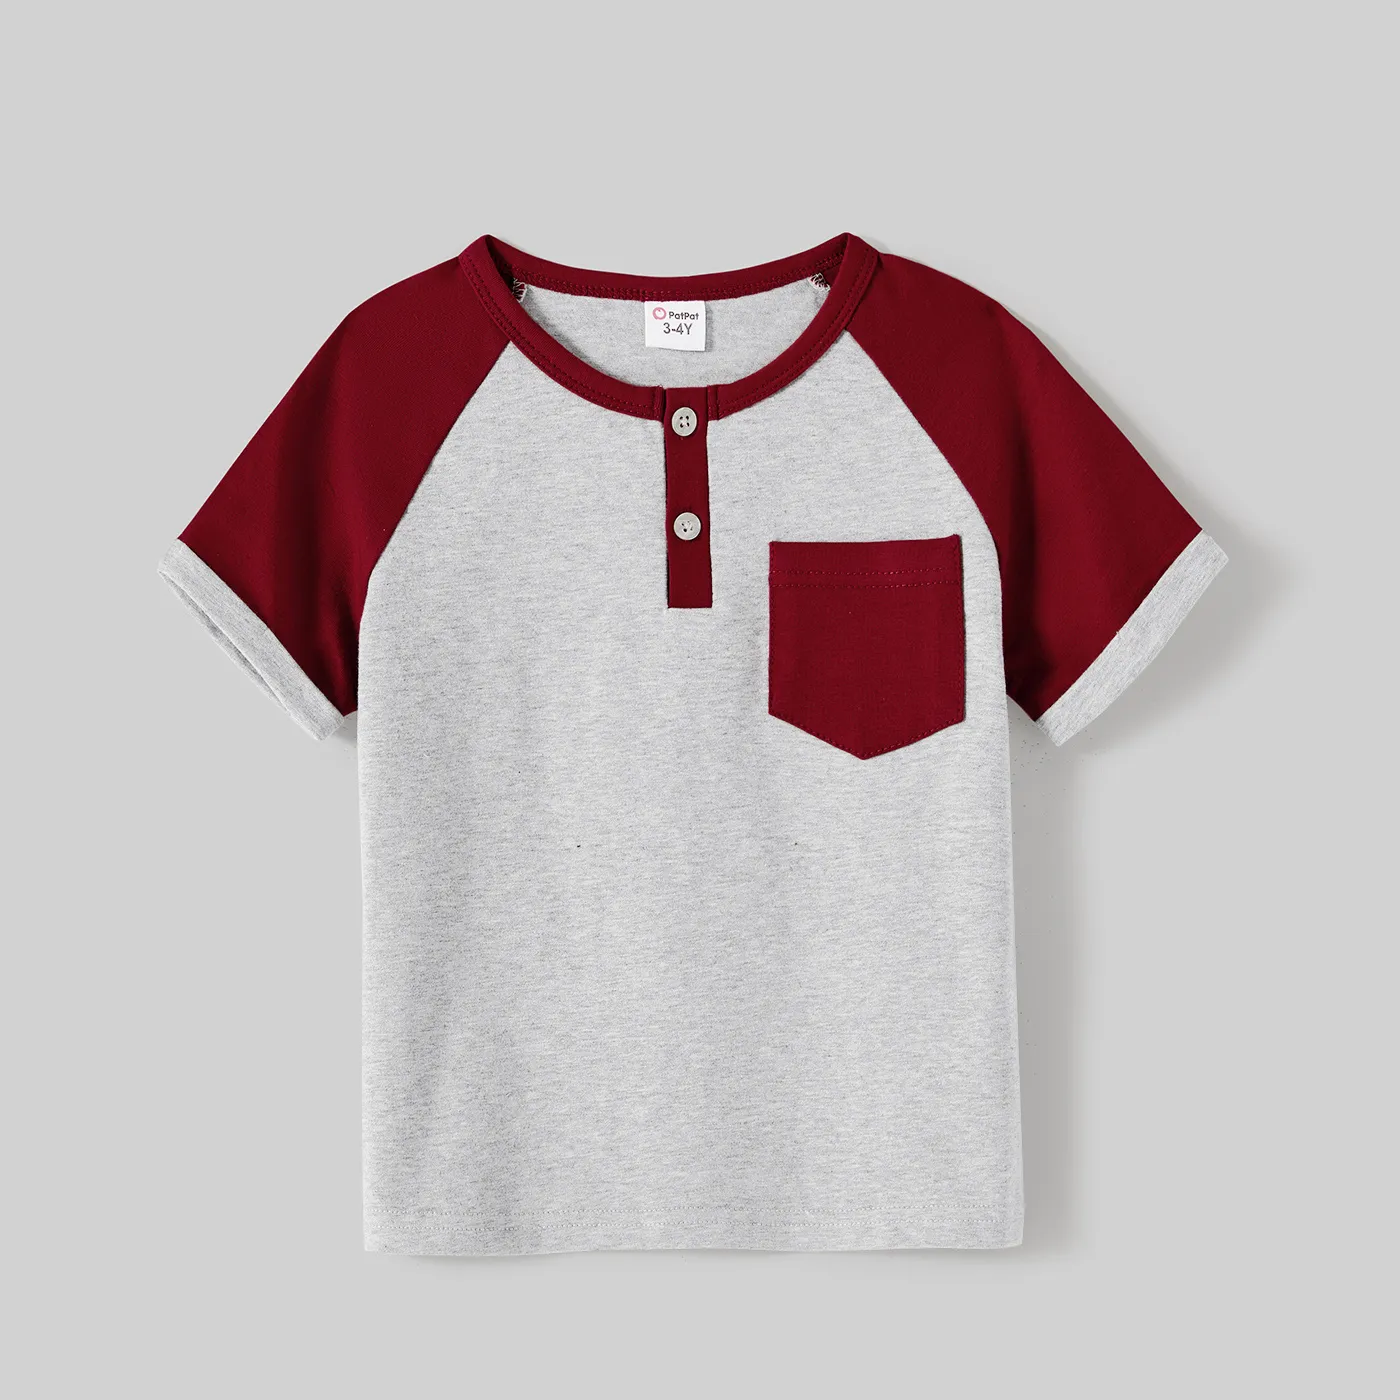 Family Matching Cotton Colorblock Raglan Sleeve T-shirts and Allover Floral Print Drawstring Ruched 